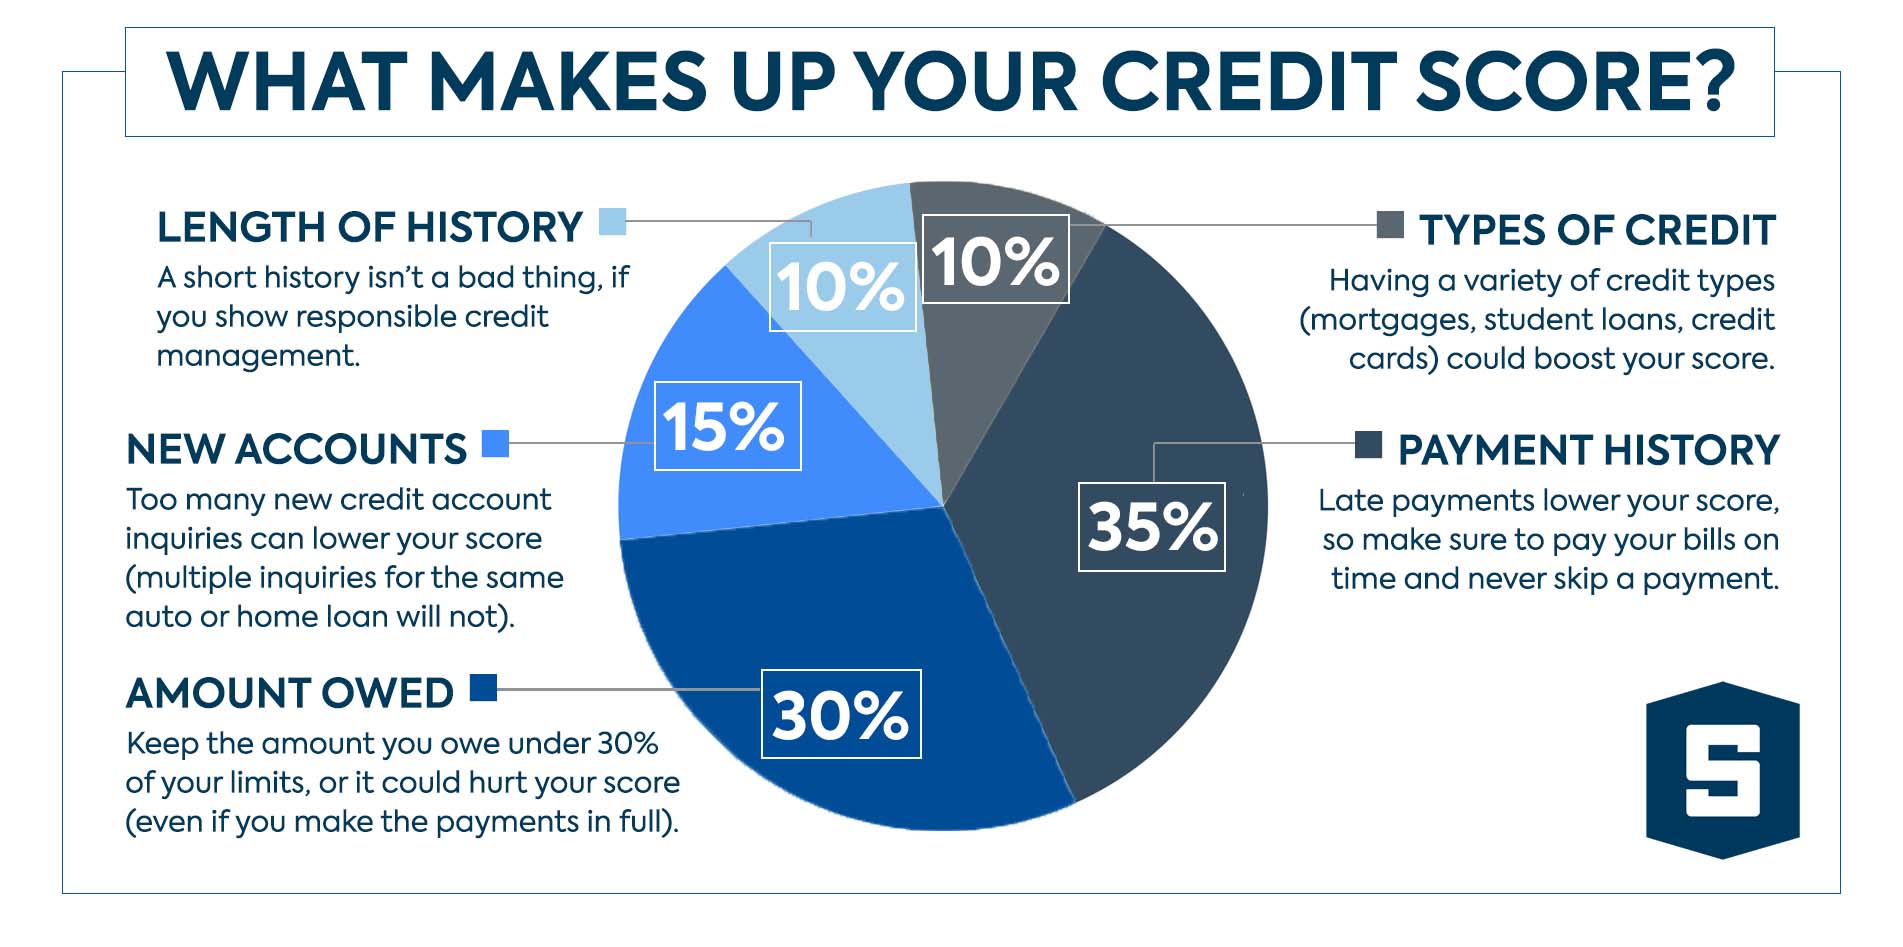 Does Closing A Credit Card Hurt Your Score